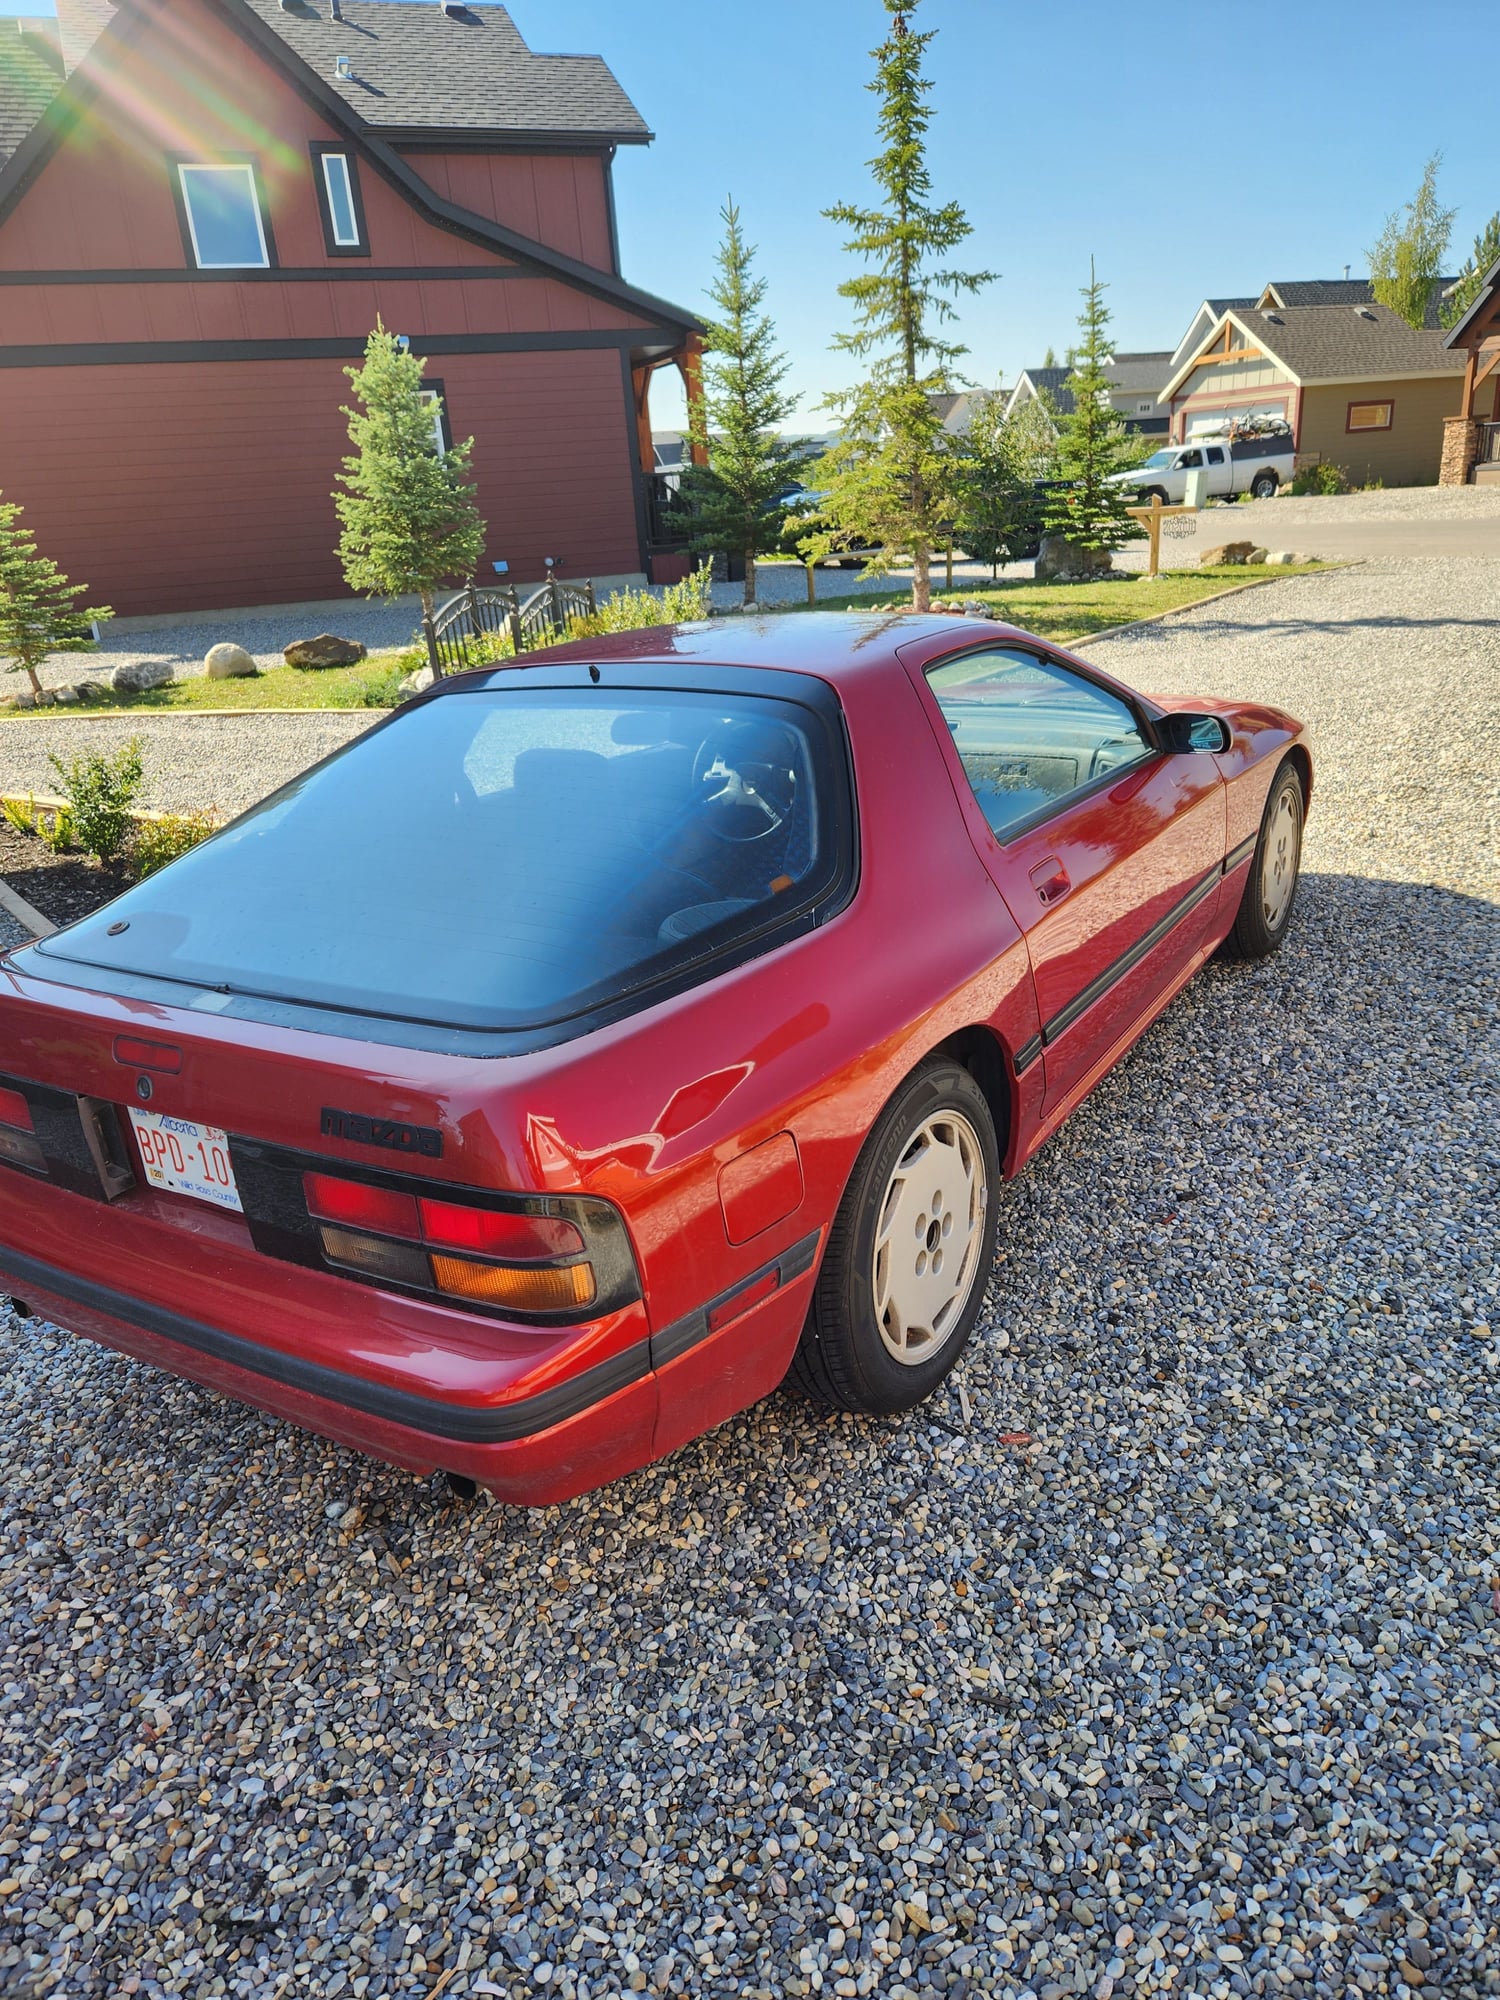 1987 Mazda RX-7 - Turbo II conversion NA RX7 - Used - VIN WP0CA2998XS655383 - 100,000 Miles - Other - 2WD - Manual - Coupe - Red - Calgary, AB T4C1B3, Canada